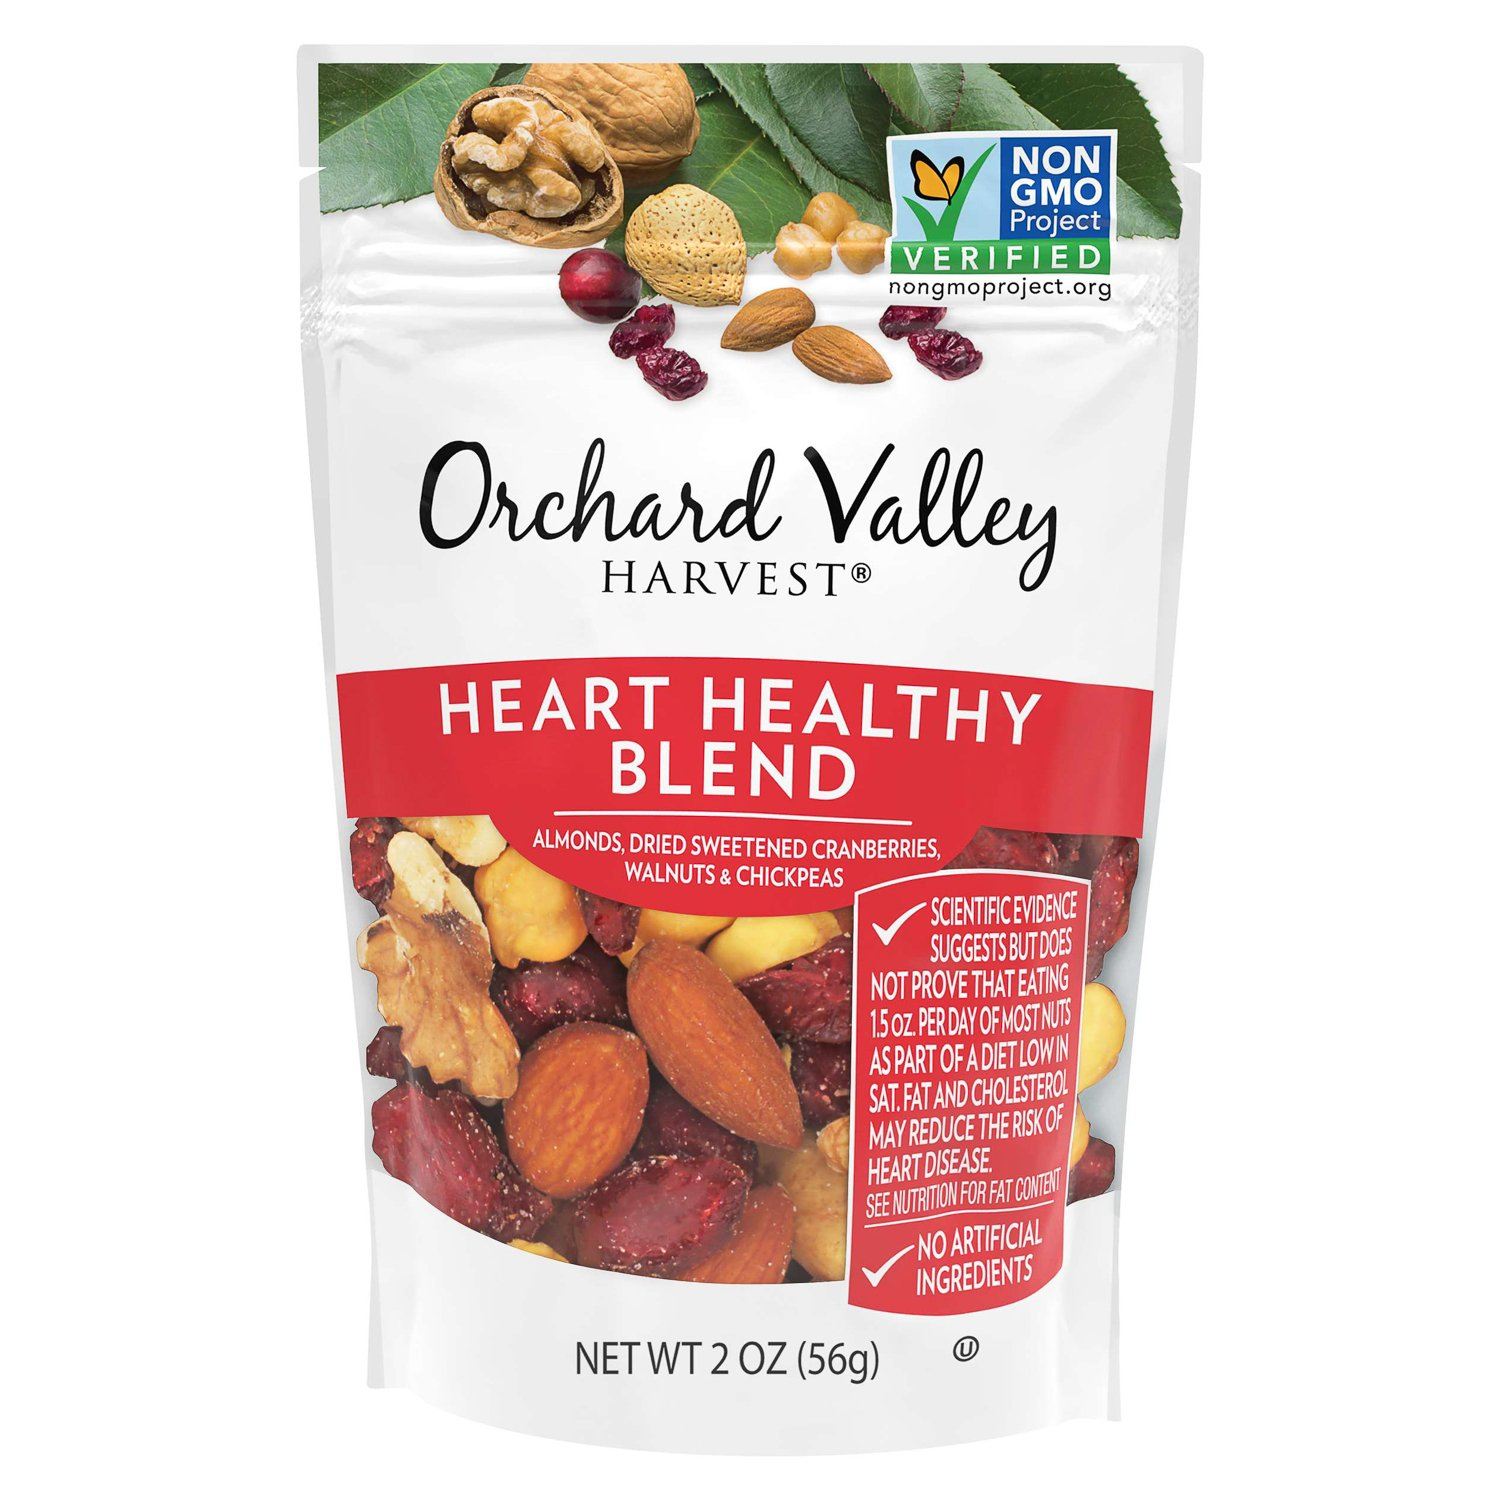 Orchard Valley Harvest Mix Orchard Valley Harvest Heart Healthy 2 Ounce 